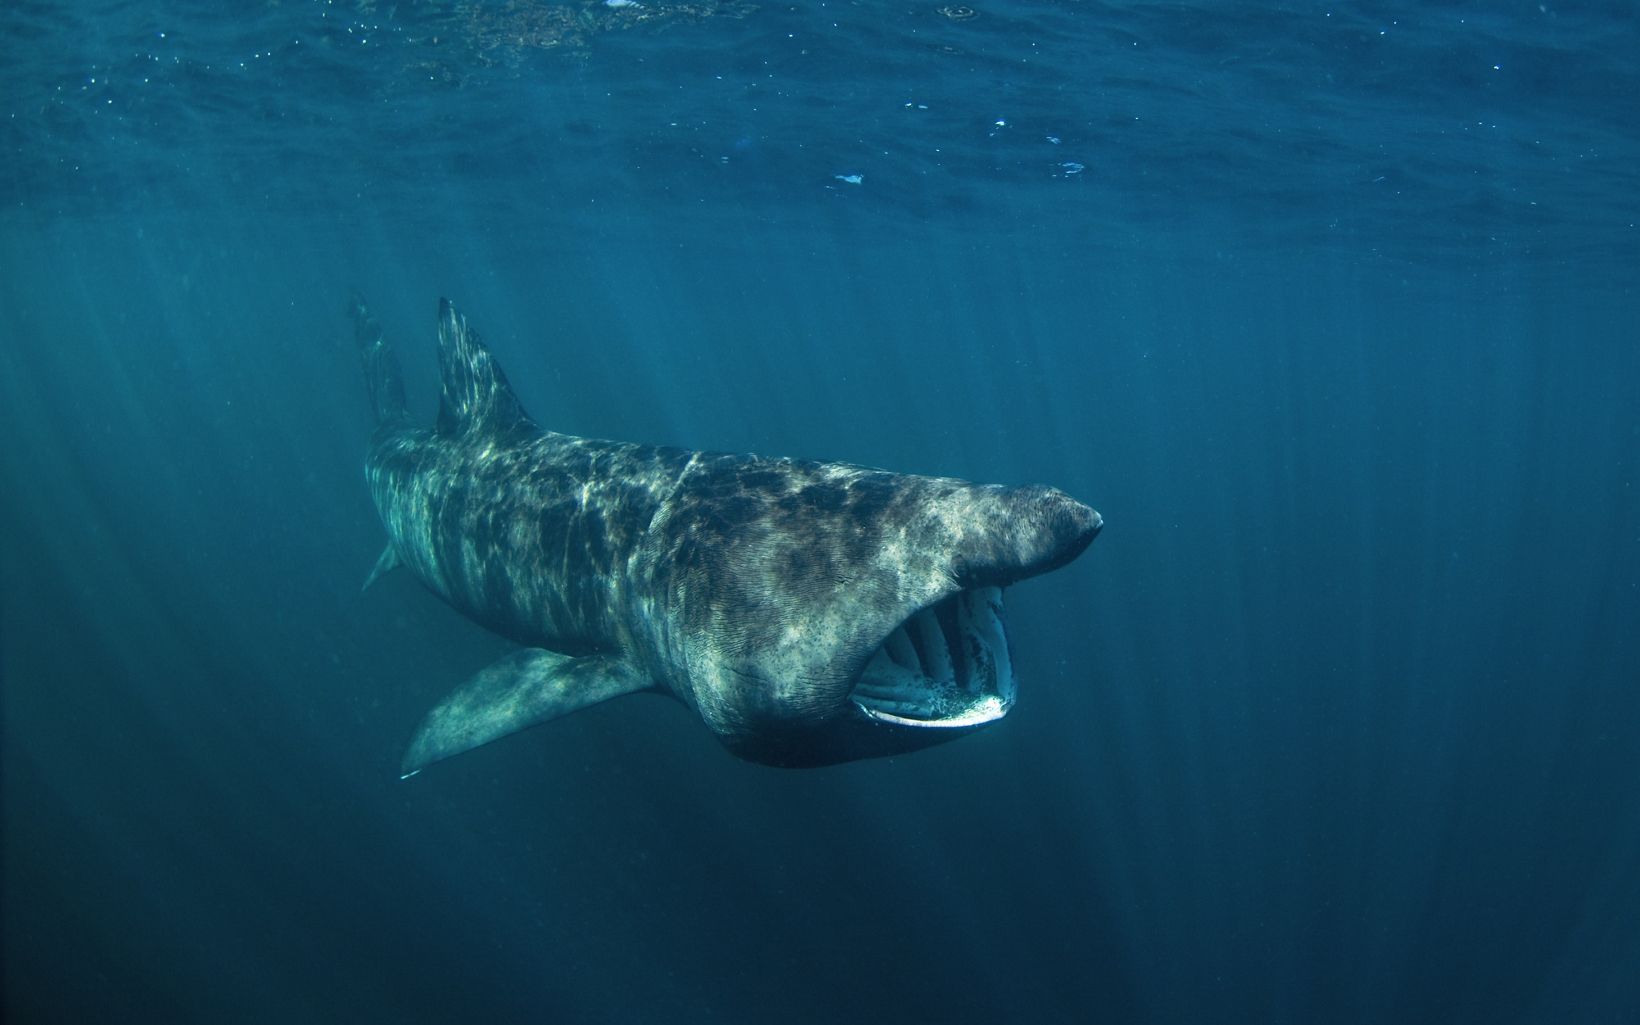 Basking shark swimming with mouth wide open.